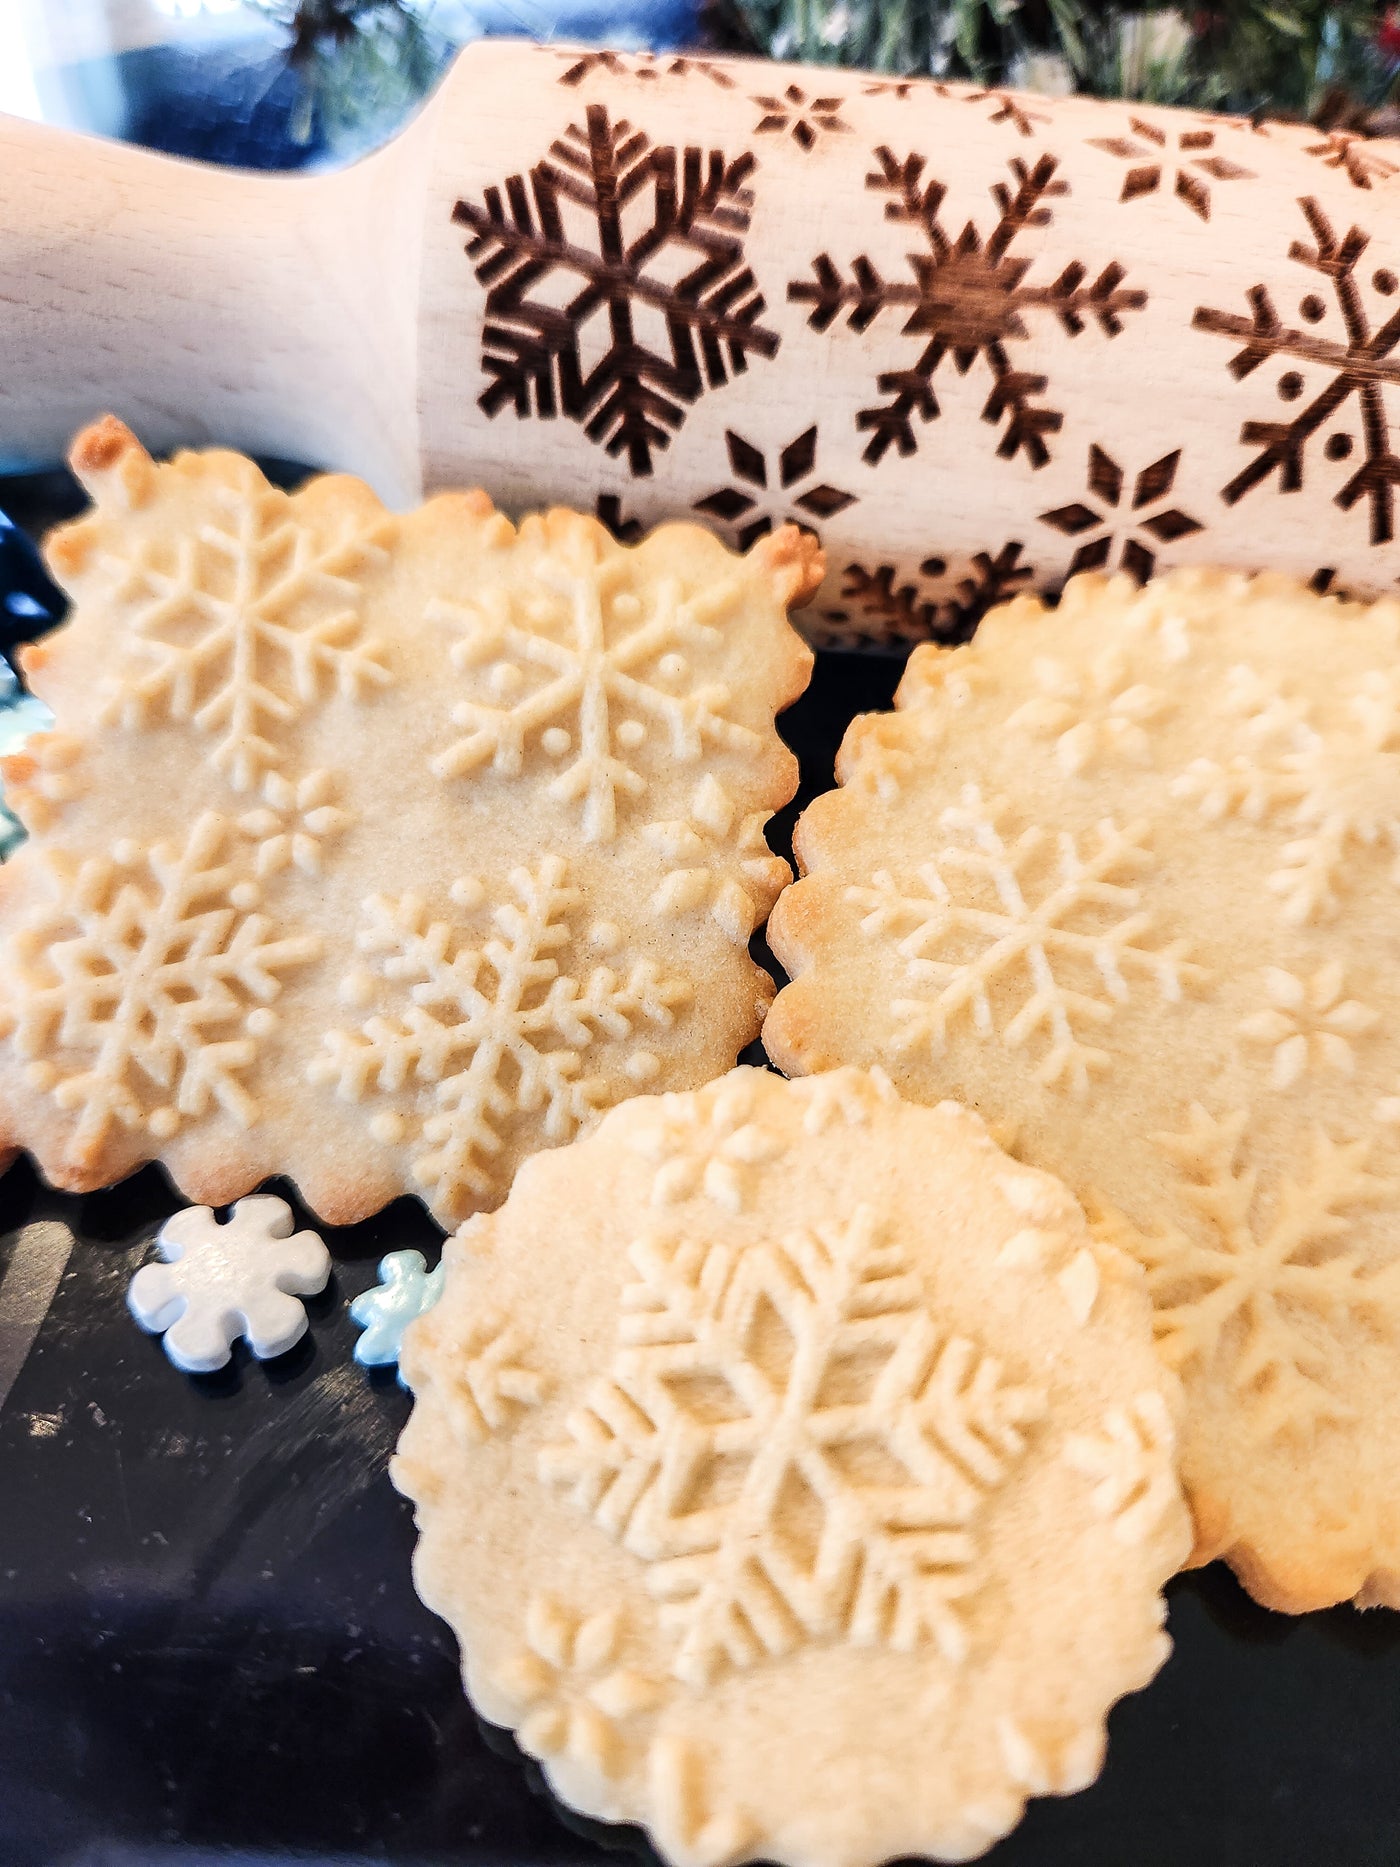 Snowflake Embossing Rolling Pin. SNOWFLAKE Pattern. Engraved Rolling Pin  With Snowflakes for Embossed Cookies or Pasta. Useful in Pottery 